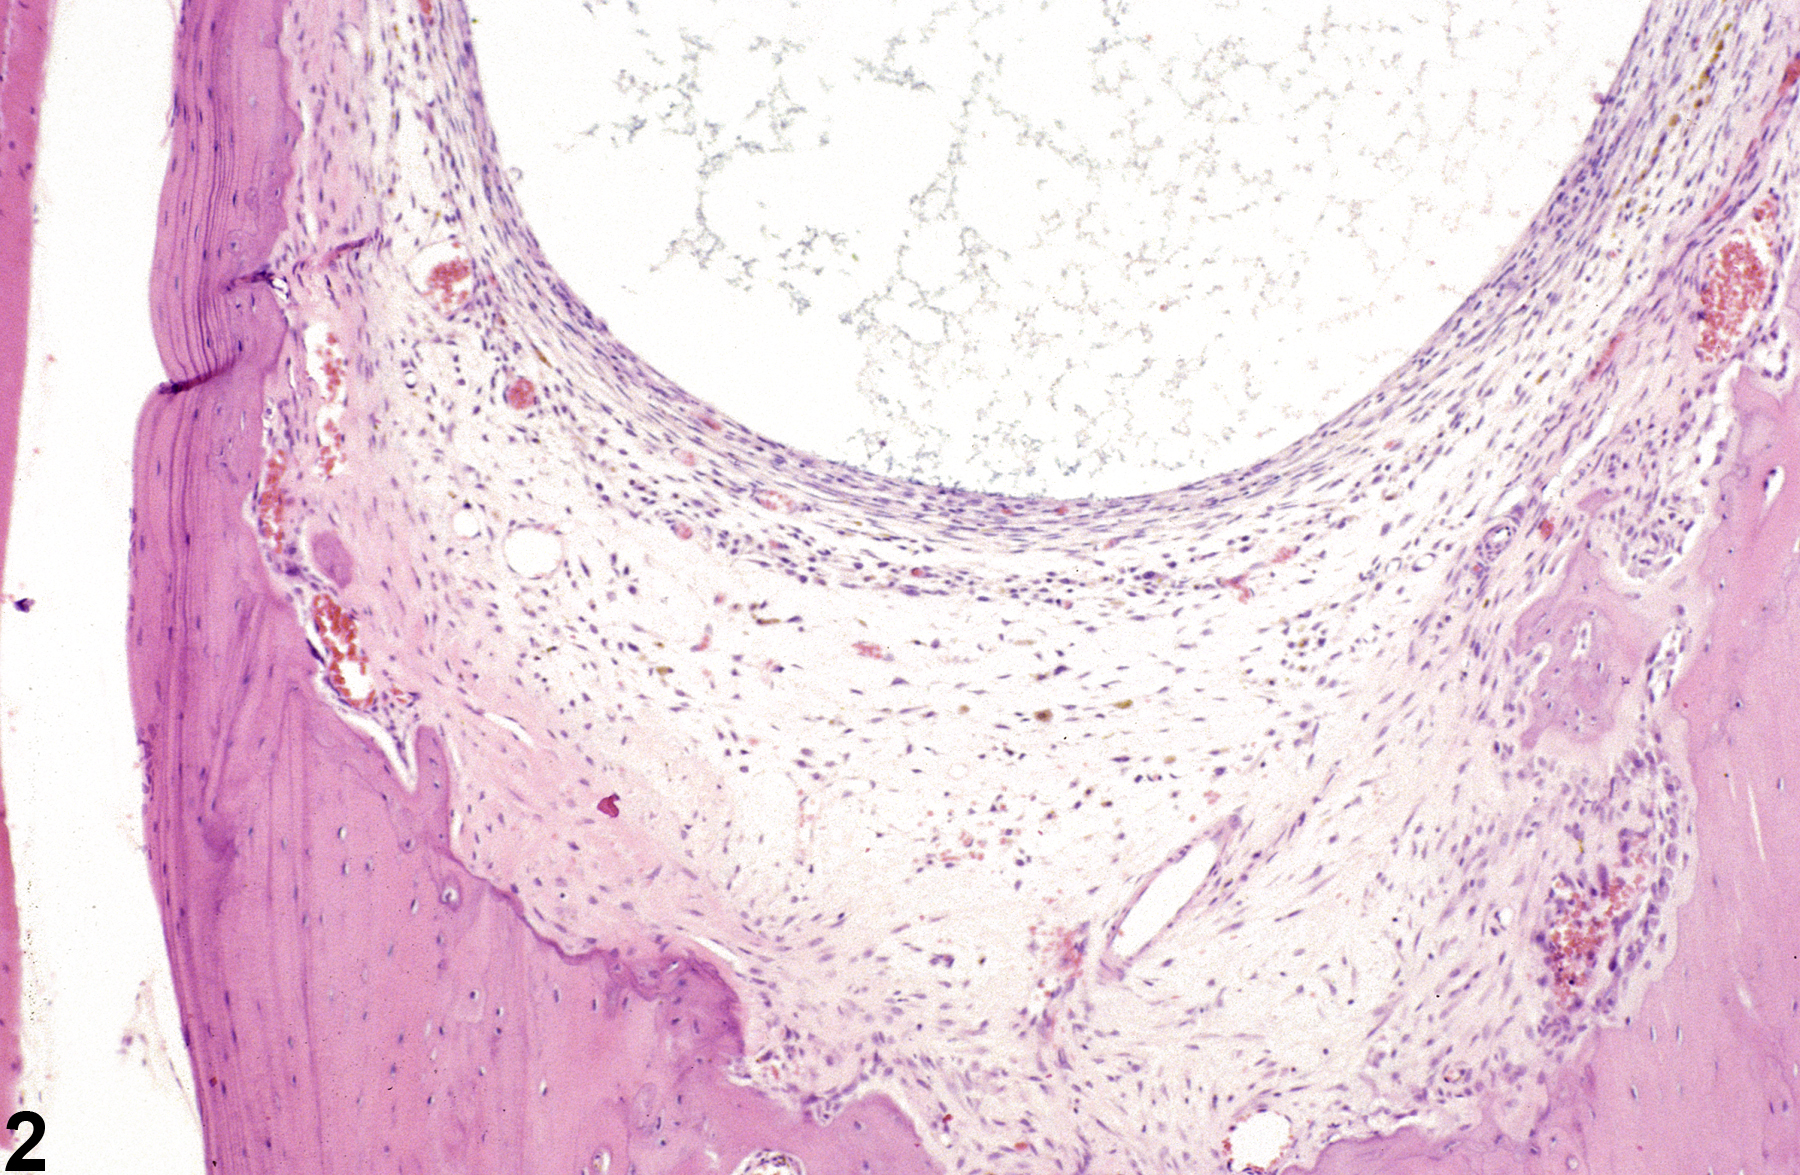 Image of cyst in the bone from a female B6C3F1/N mouse in a chronic study